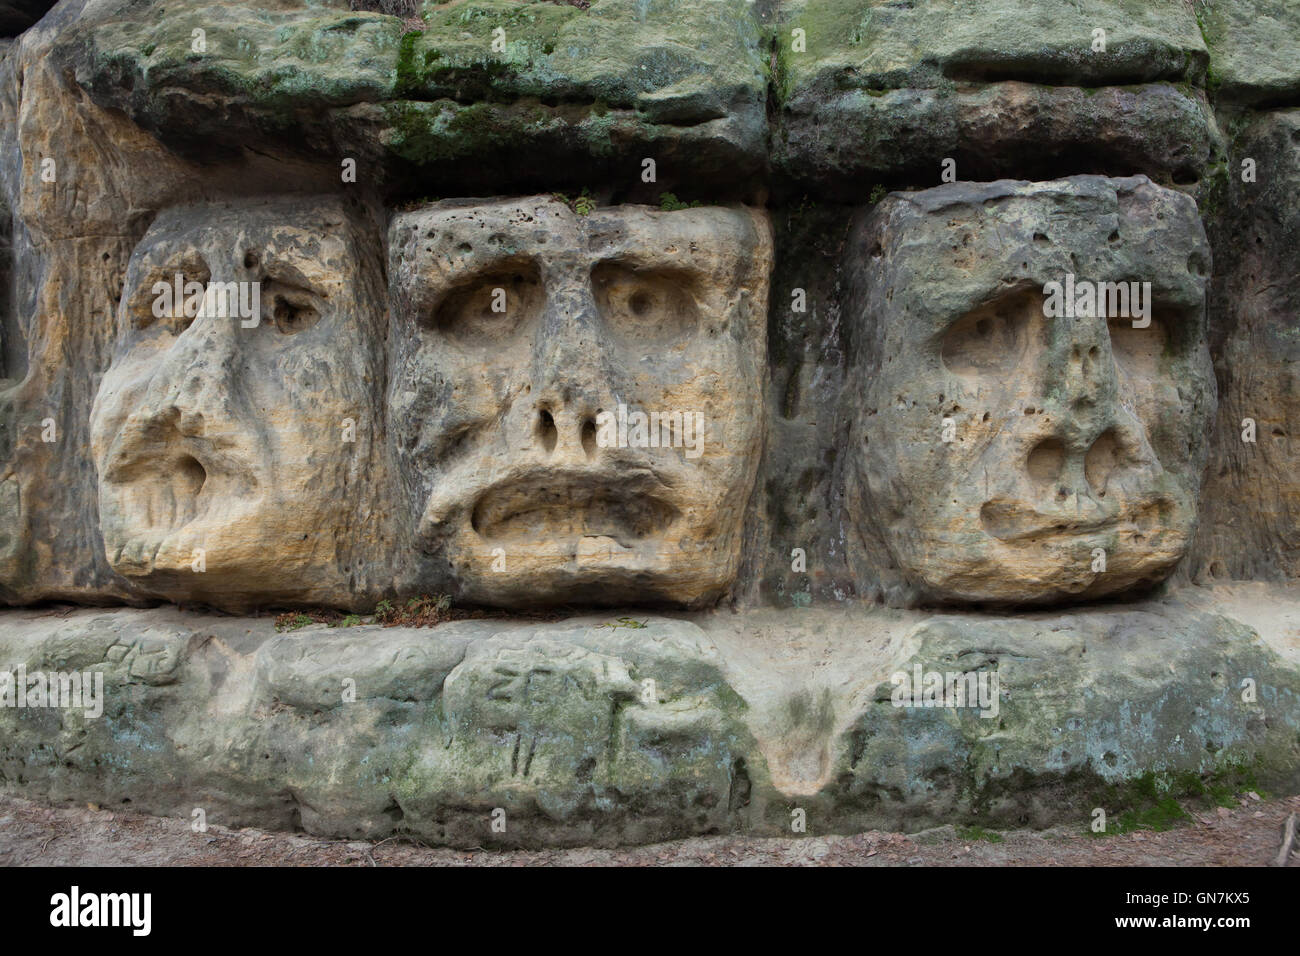 Stone faces carved by Czech sculptor Vaclav Levy in the sandstone rocks in the forest outside the village of Zelizy in Central Bohemia, Czech Republic. This complex of sculptural works known as the Harfenice (Harpist) was created by Vaclav Levy during the 1840s together with the Devil's Heads and the Klacelka Cave located in the forest nearby. Stock Photo